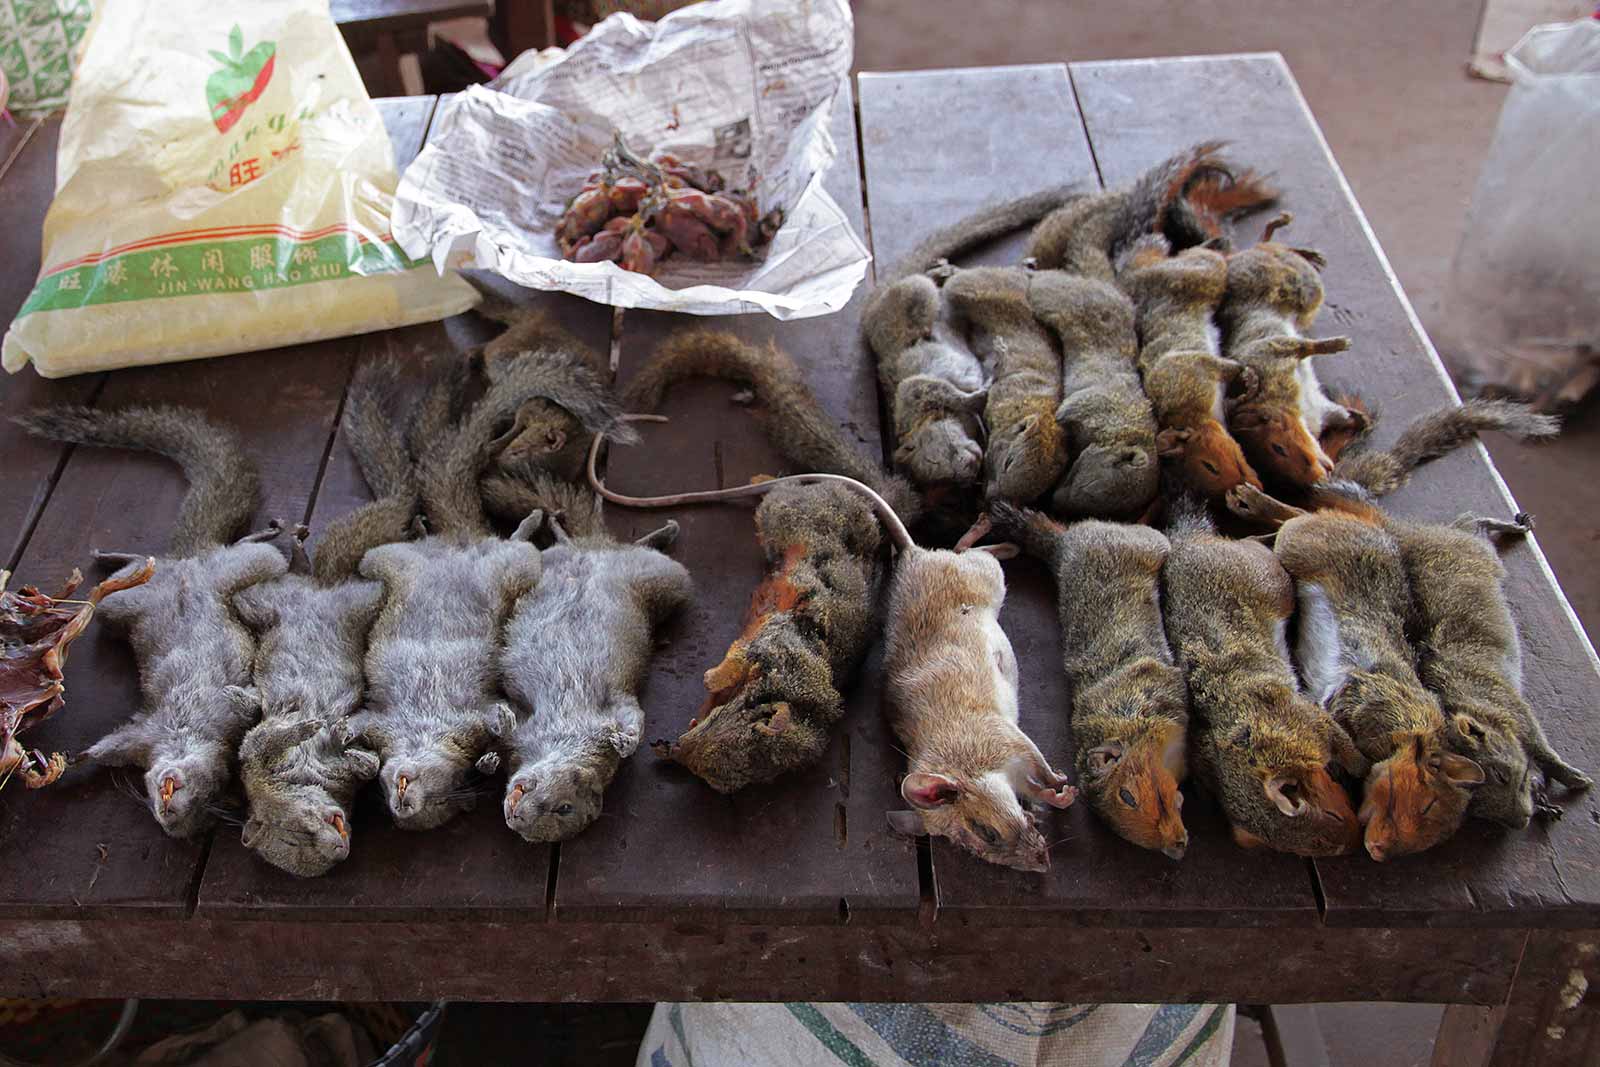 Bush meat at a market in Laos.